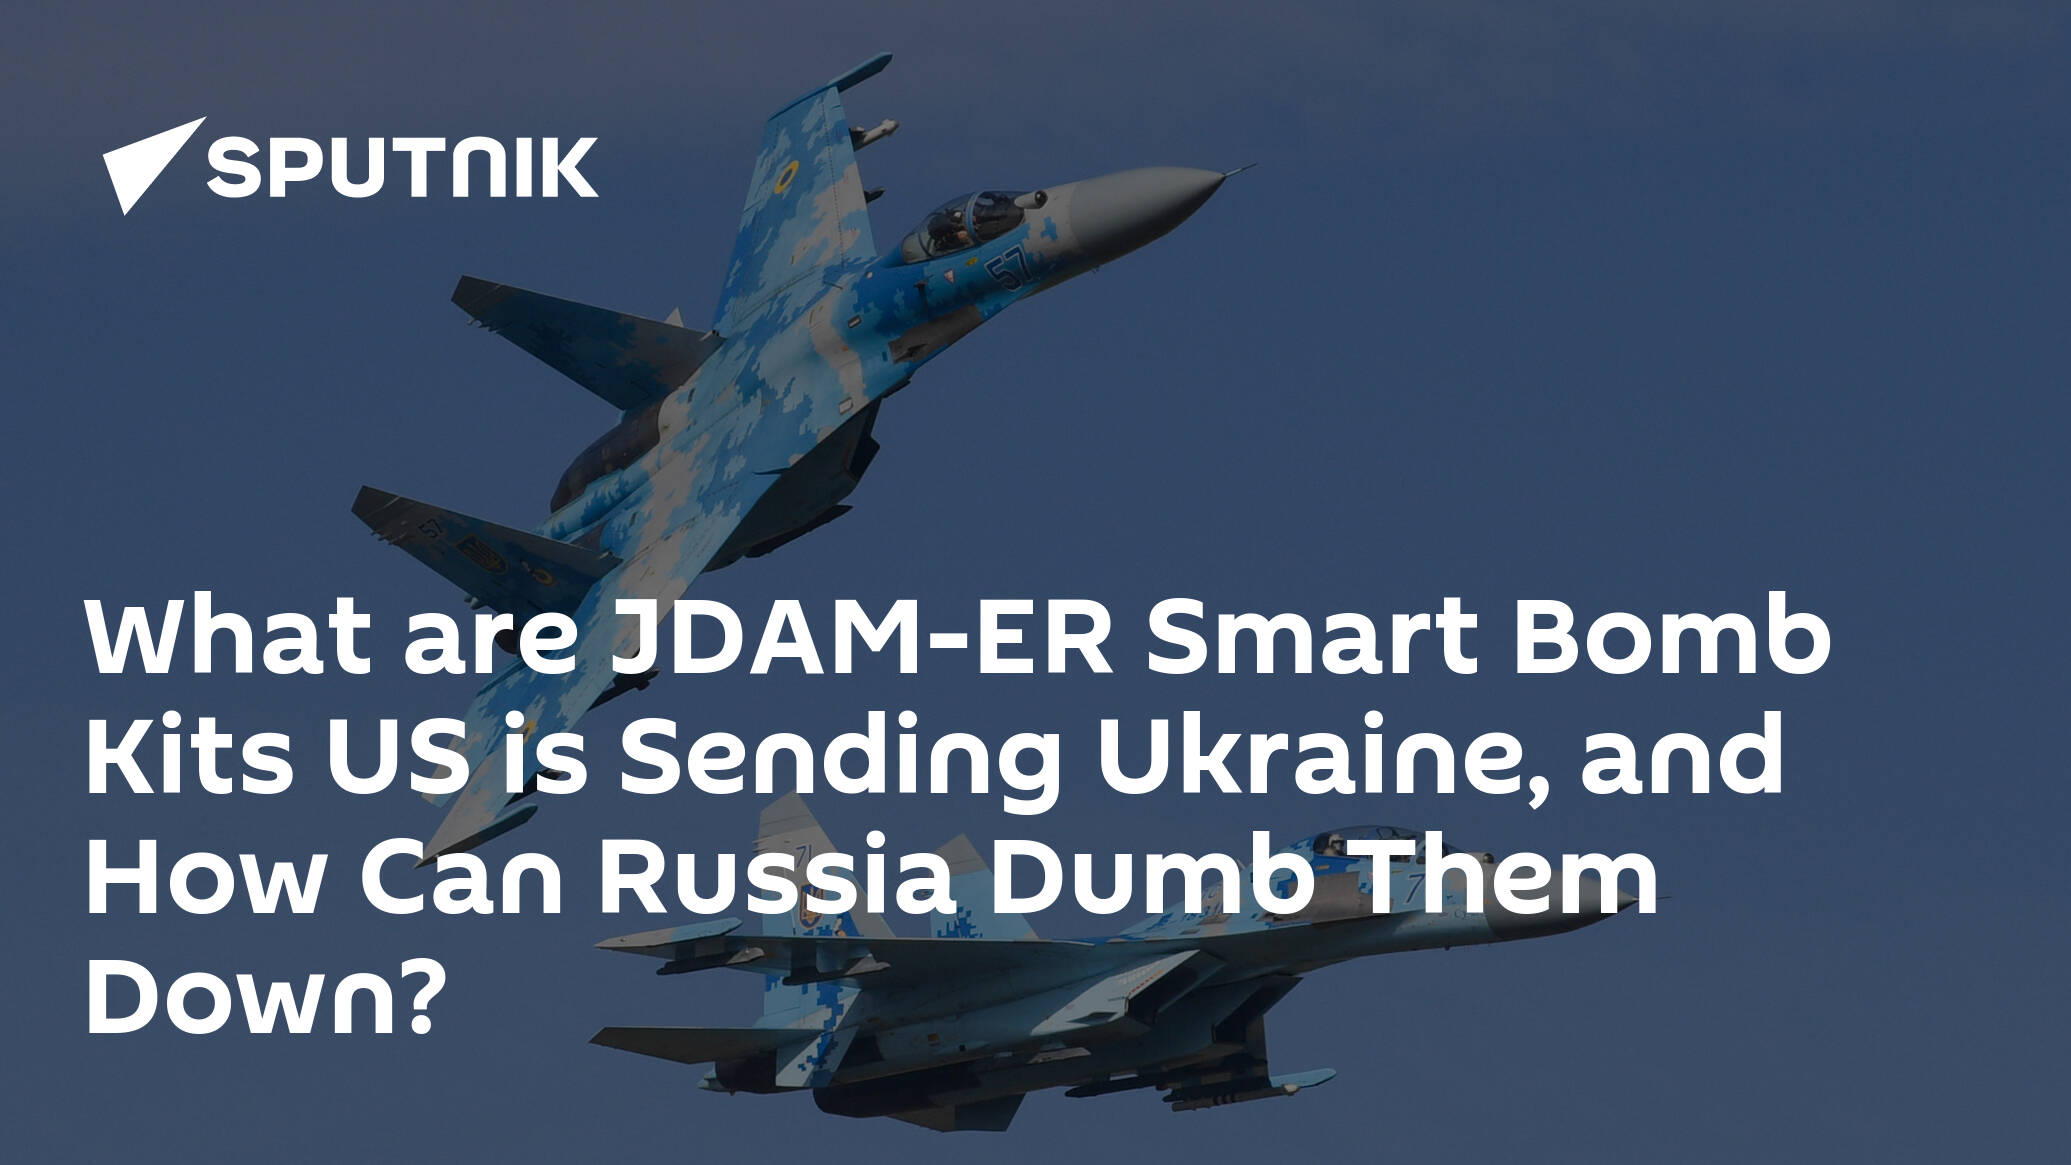 What are JDAM-ER Smart Bomb Kits US is Sending Ukraine, and How Can Russia Dumb Them Down?